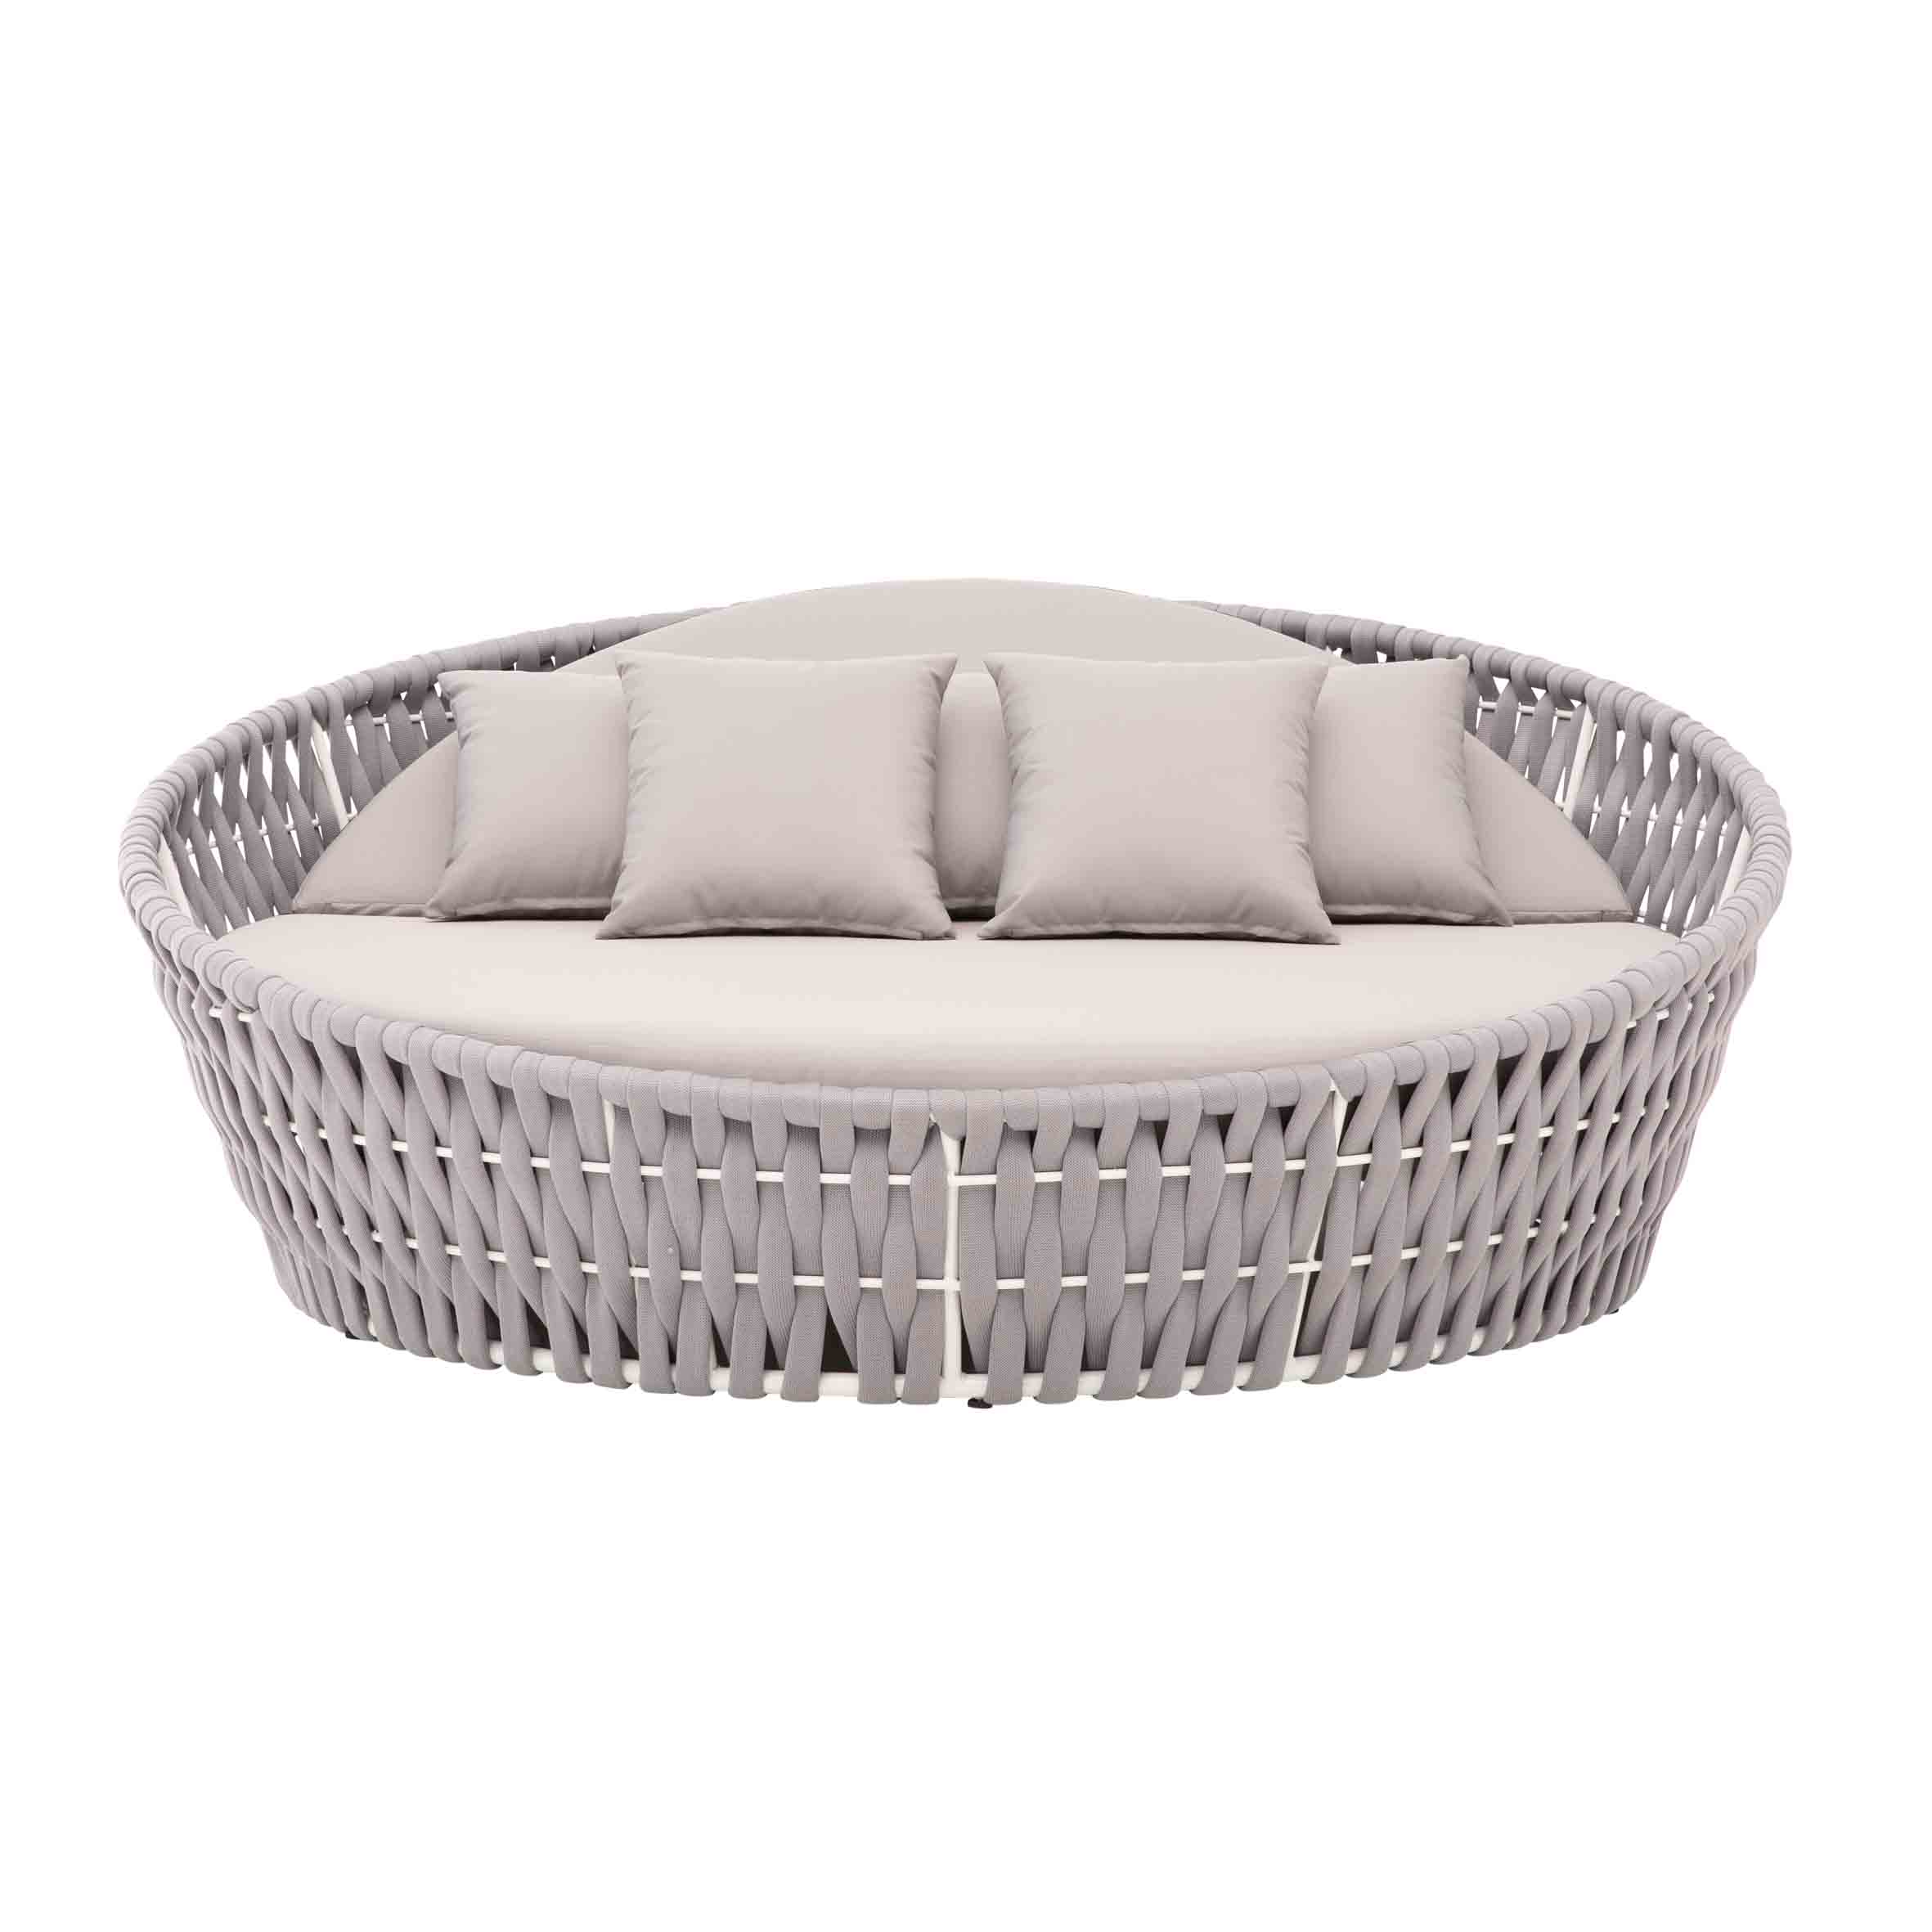 Art rope round daybed S8